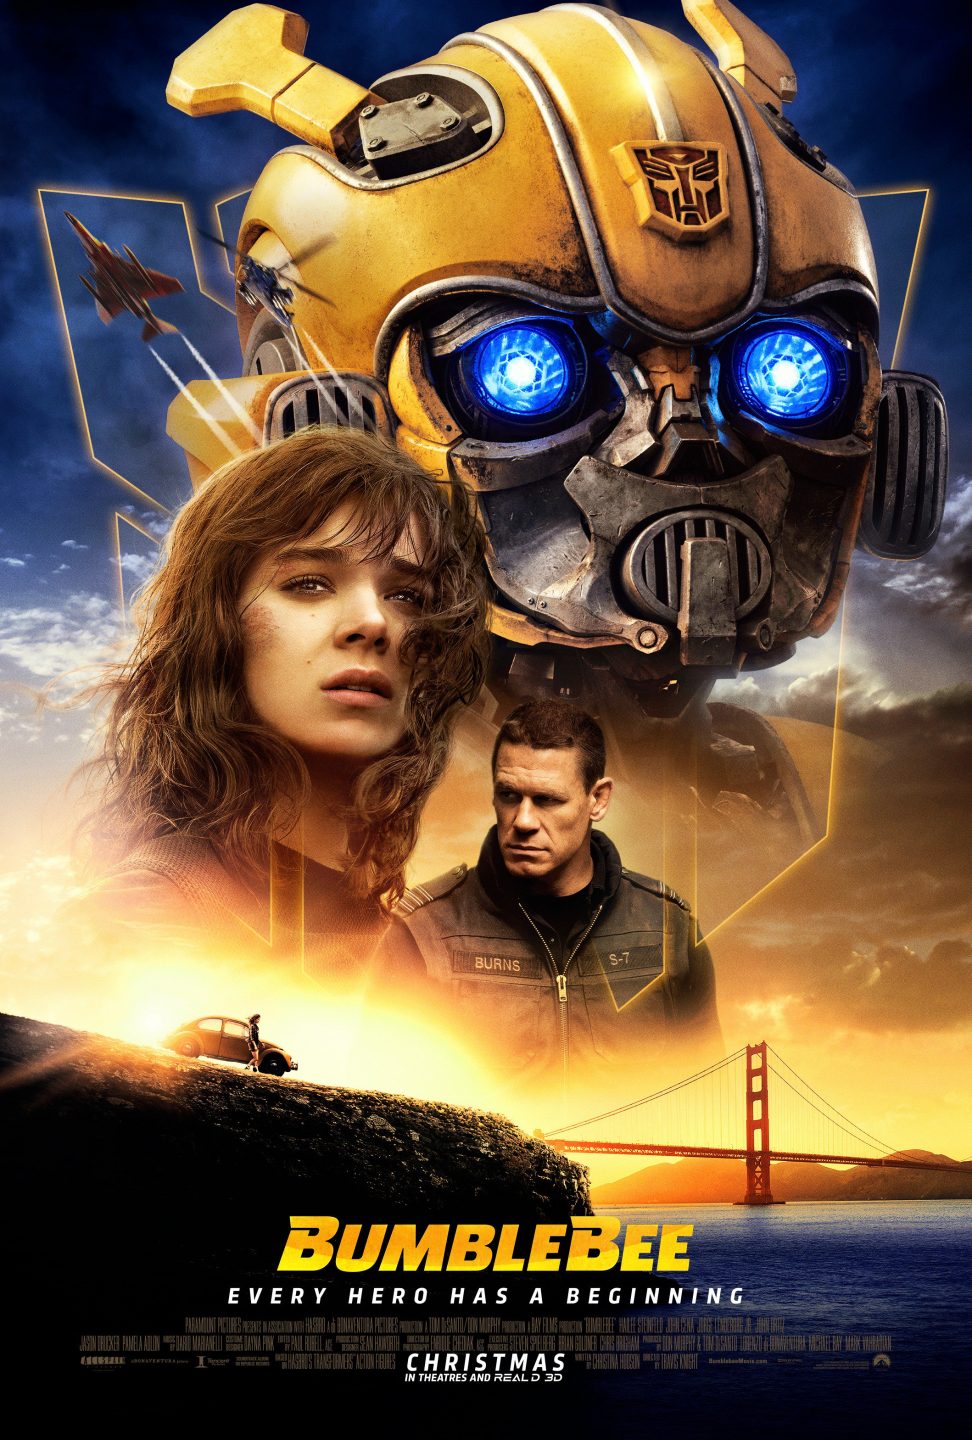 Bumblebee poster (Paramount Pictures)